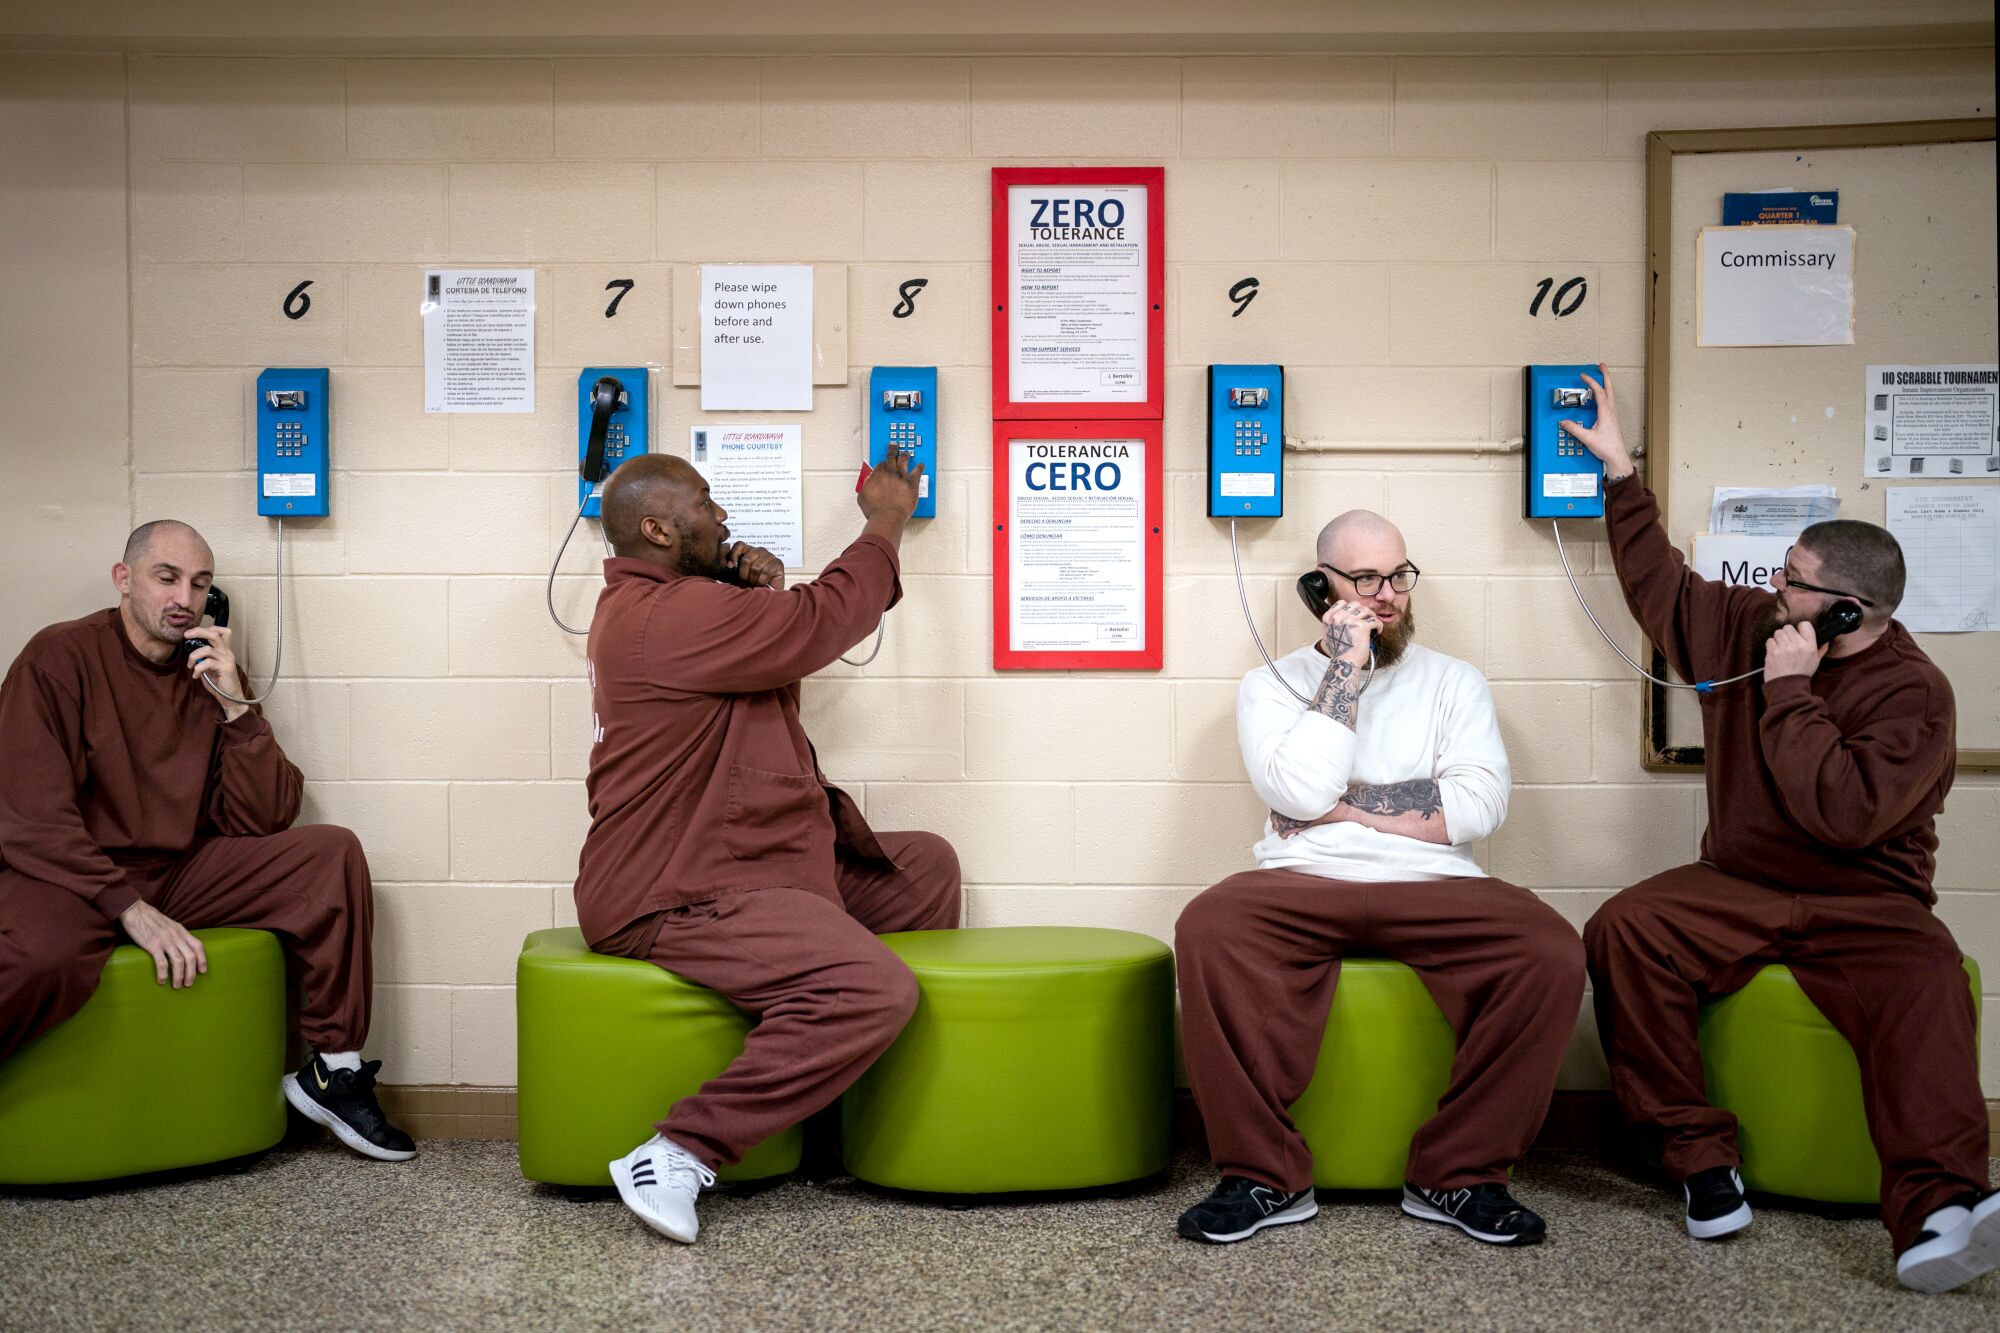 Four inmates in maroon uniforms sit on bolsters and each talks to a telephone mounted on the wall behind them.